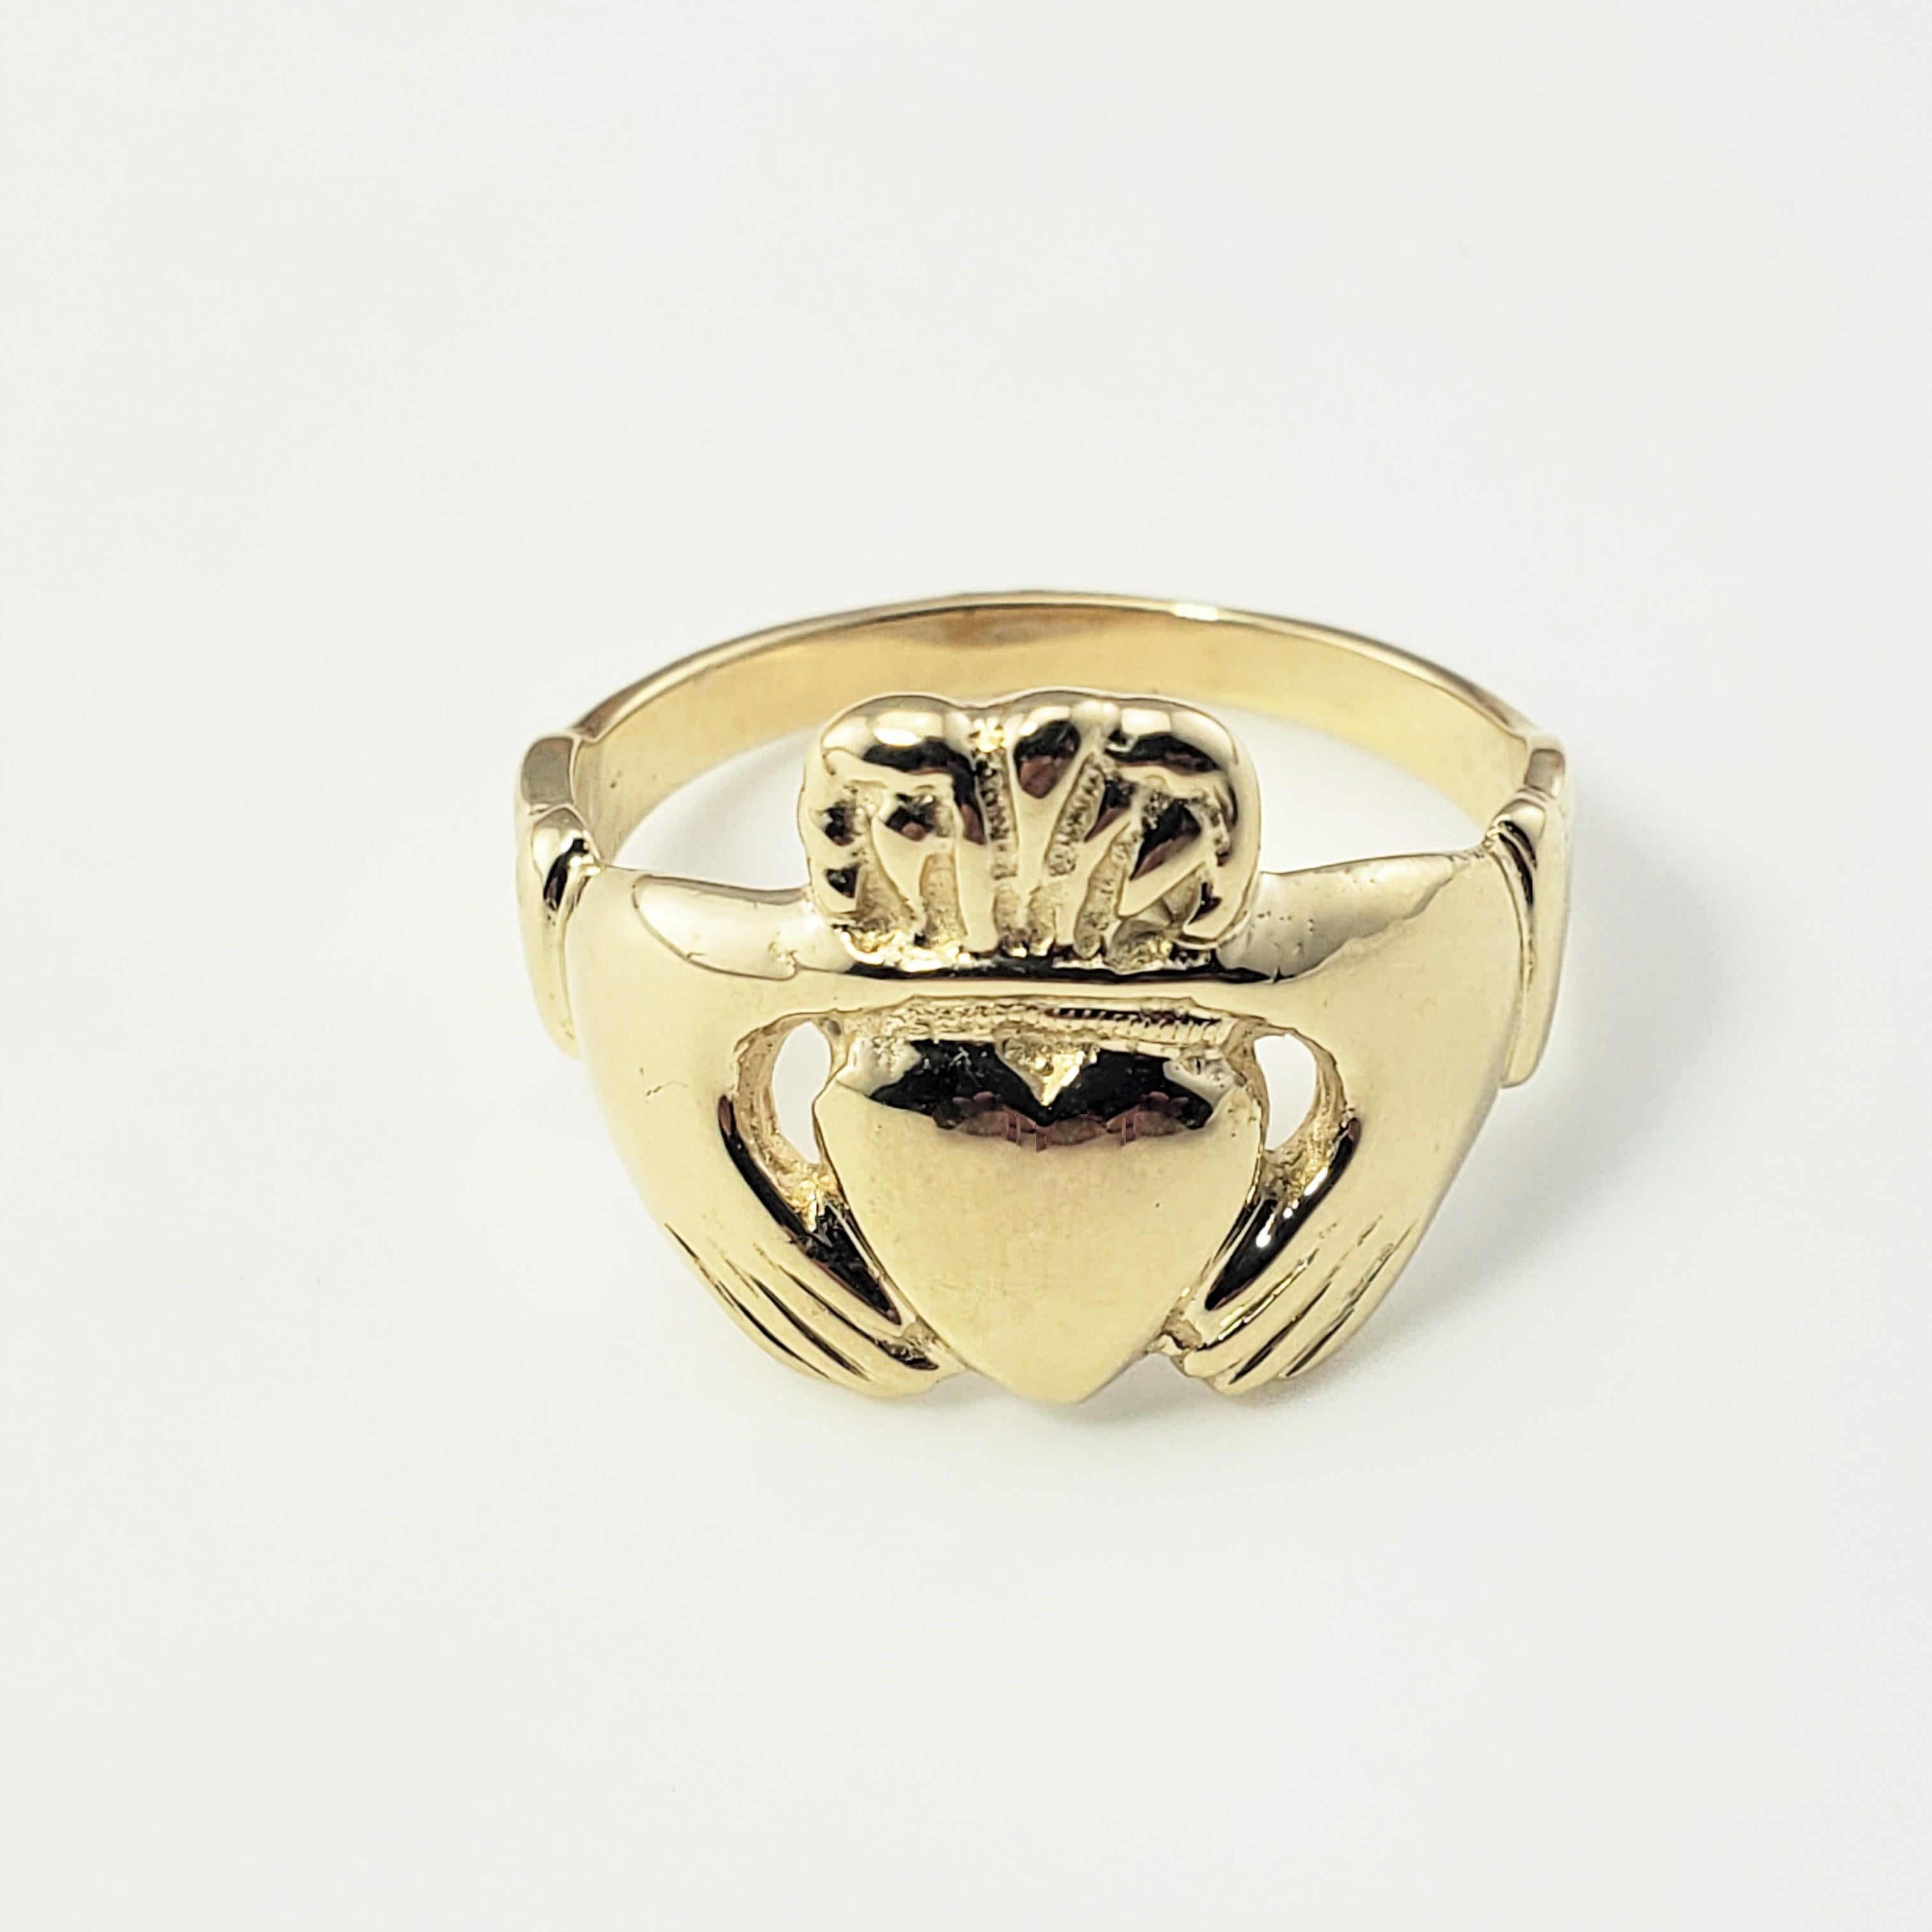 14 Karat Yellow Gold Claddagh Ring Size 5.75-

The traditional Irish Claddagh ring is a symbol of friendship, love, and loyalty.  Beautifully detailed in 14K yellow gold.  Width:  13 mm.
Shank: 2 mm.

Size: 5.75

Weight:  2.4 dwt. / 3.8